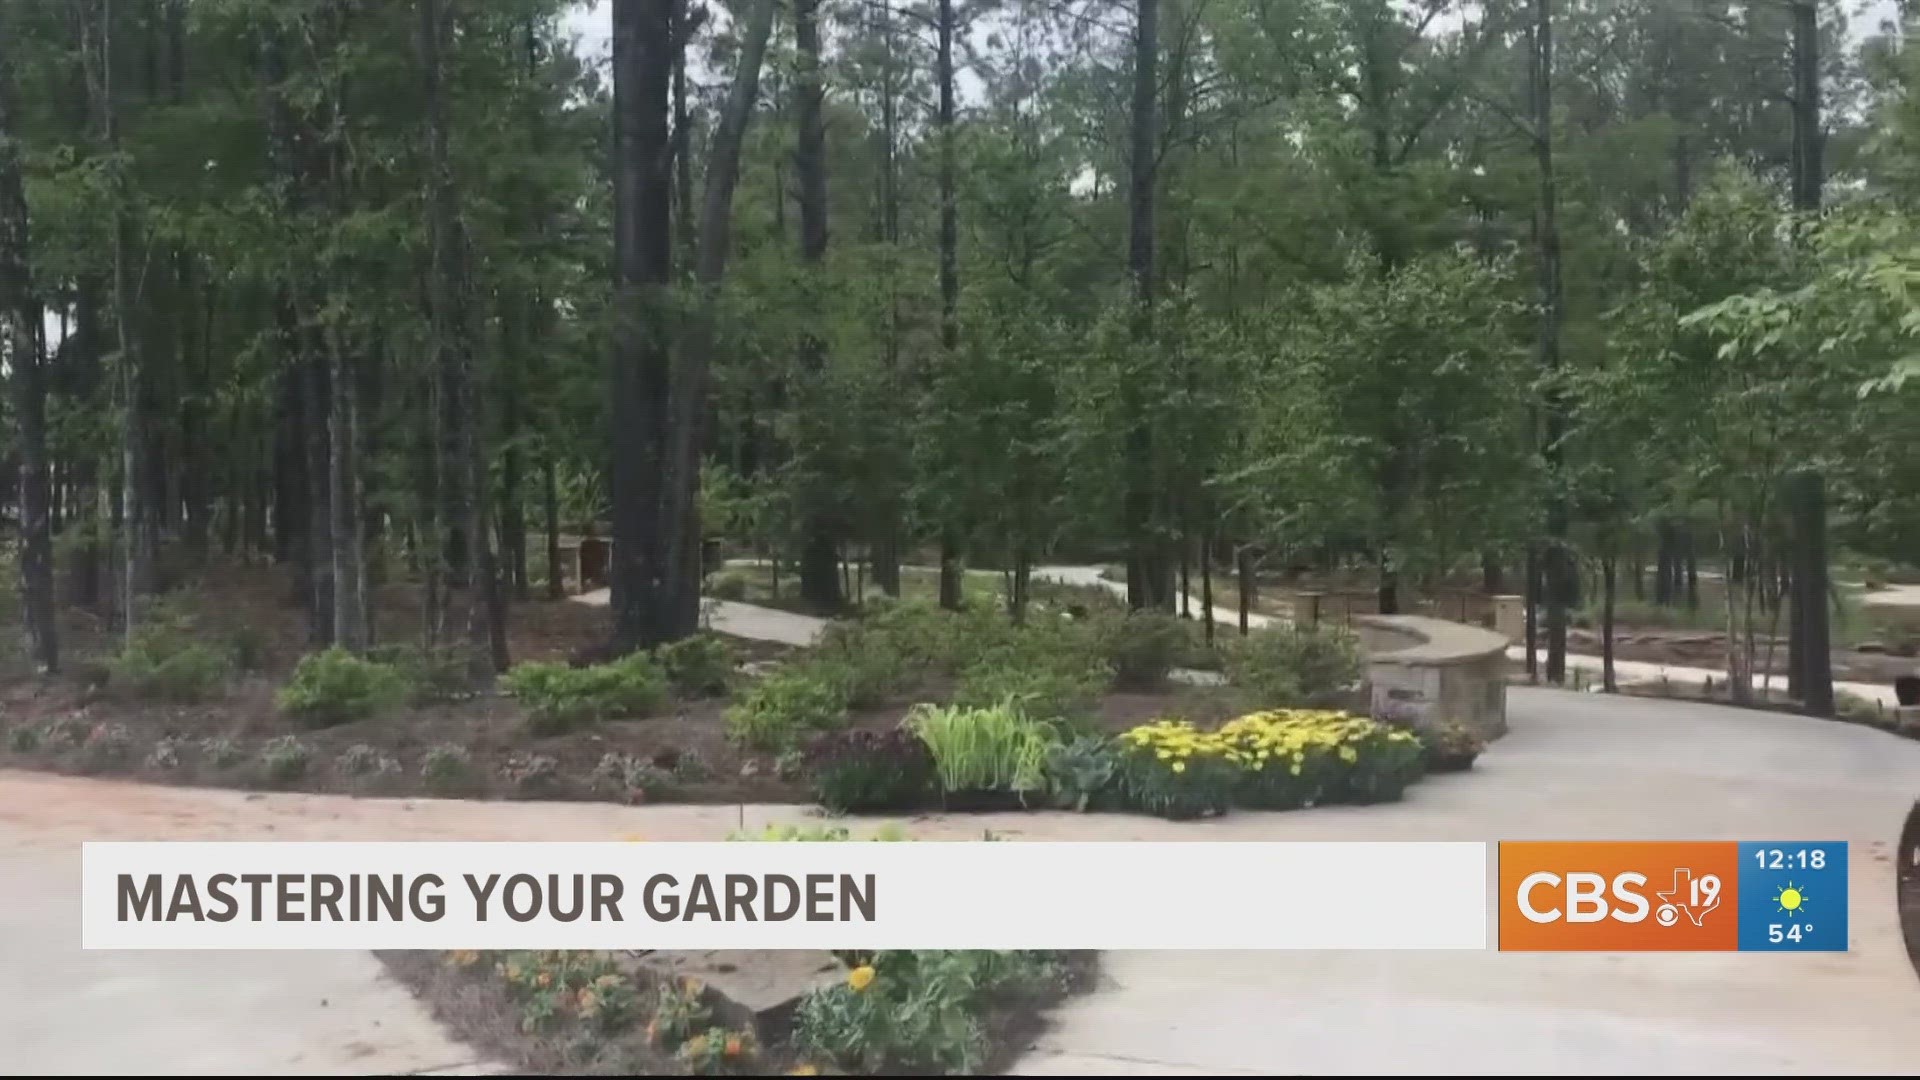 Join CBS19 and the Smith County Master Gardeners Thursdays on The Noon Show.